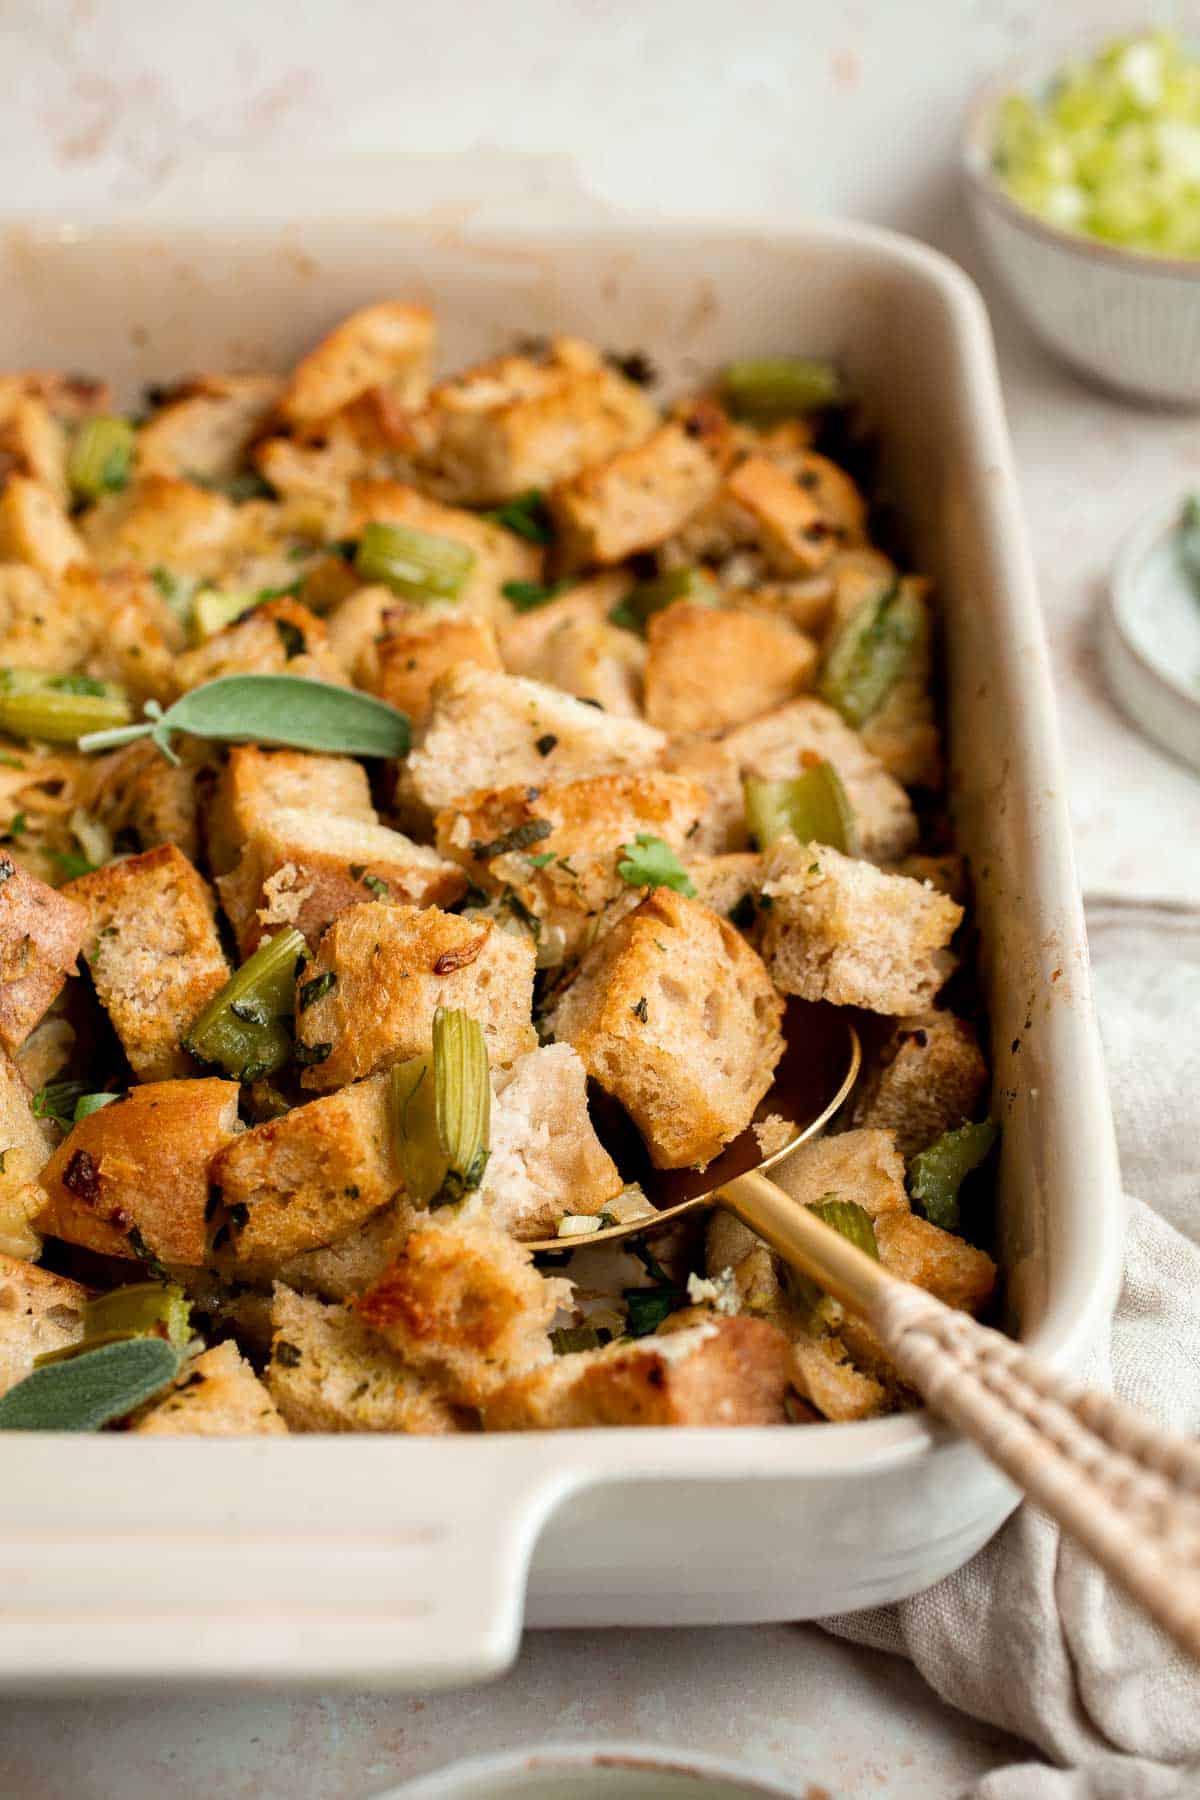 Skip the boxed mix and make your own Homemade Stuffing from scratch using a few common ingredients for a delicious, aromatic side dish this Thanksgiving. | aheadofthyme.com